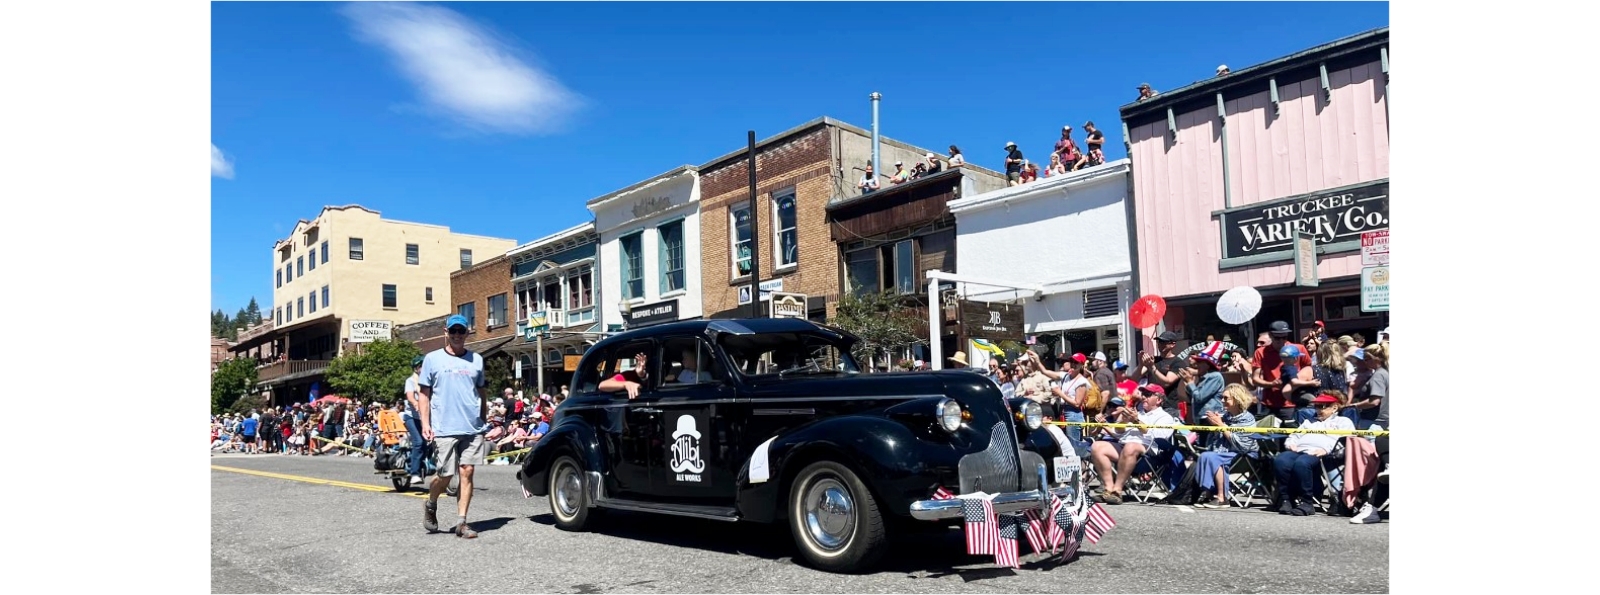 Spirit and Smiles Abound at Truckee's 4th of July Parade